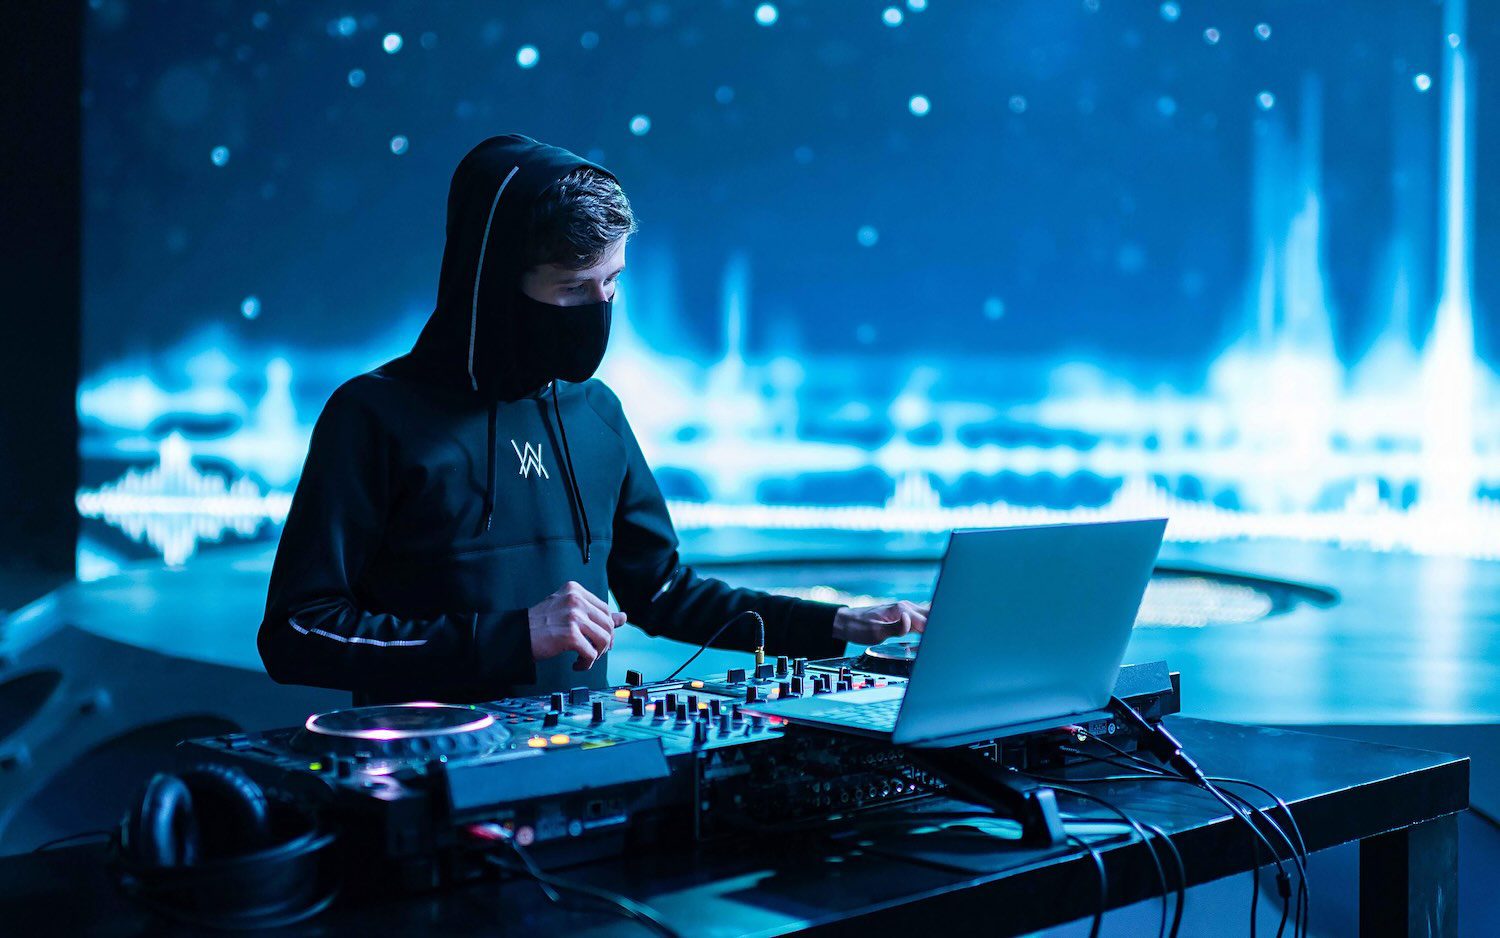 Superstar DJ Alan Walker talks about how he uses AI in music and discusses his virtual theme park Walkerworld in Fortnite during a Rolling Stone interview.